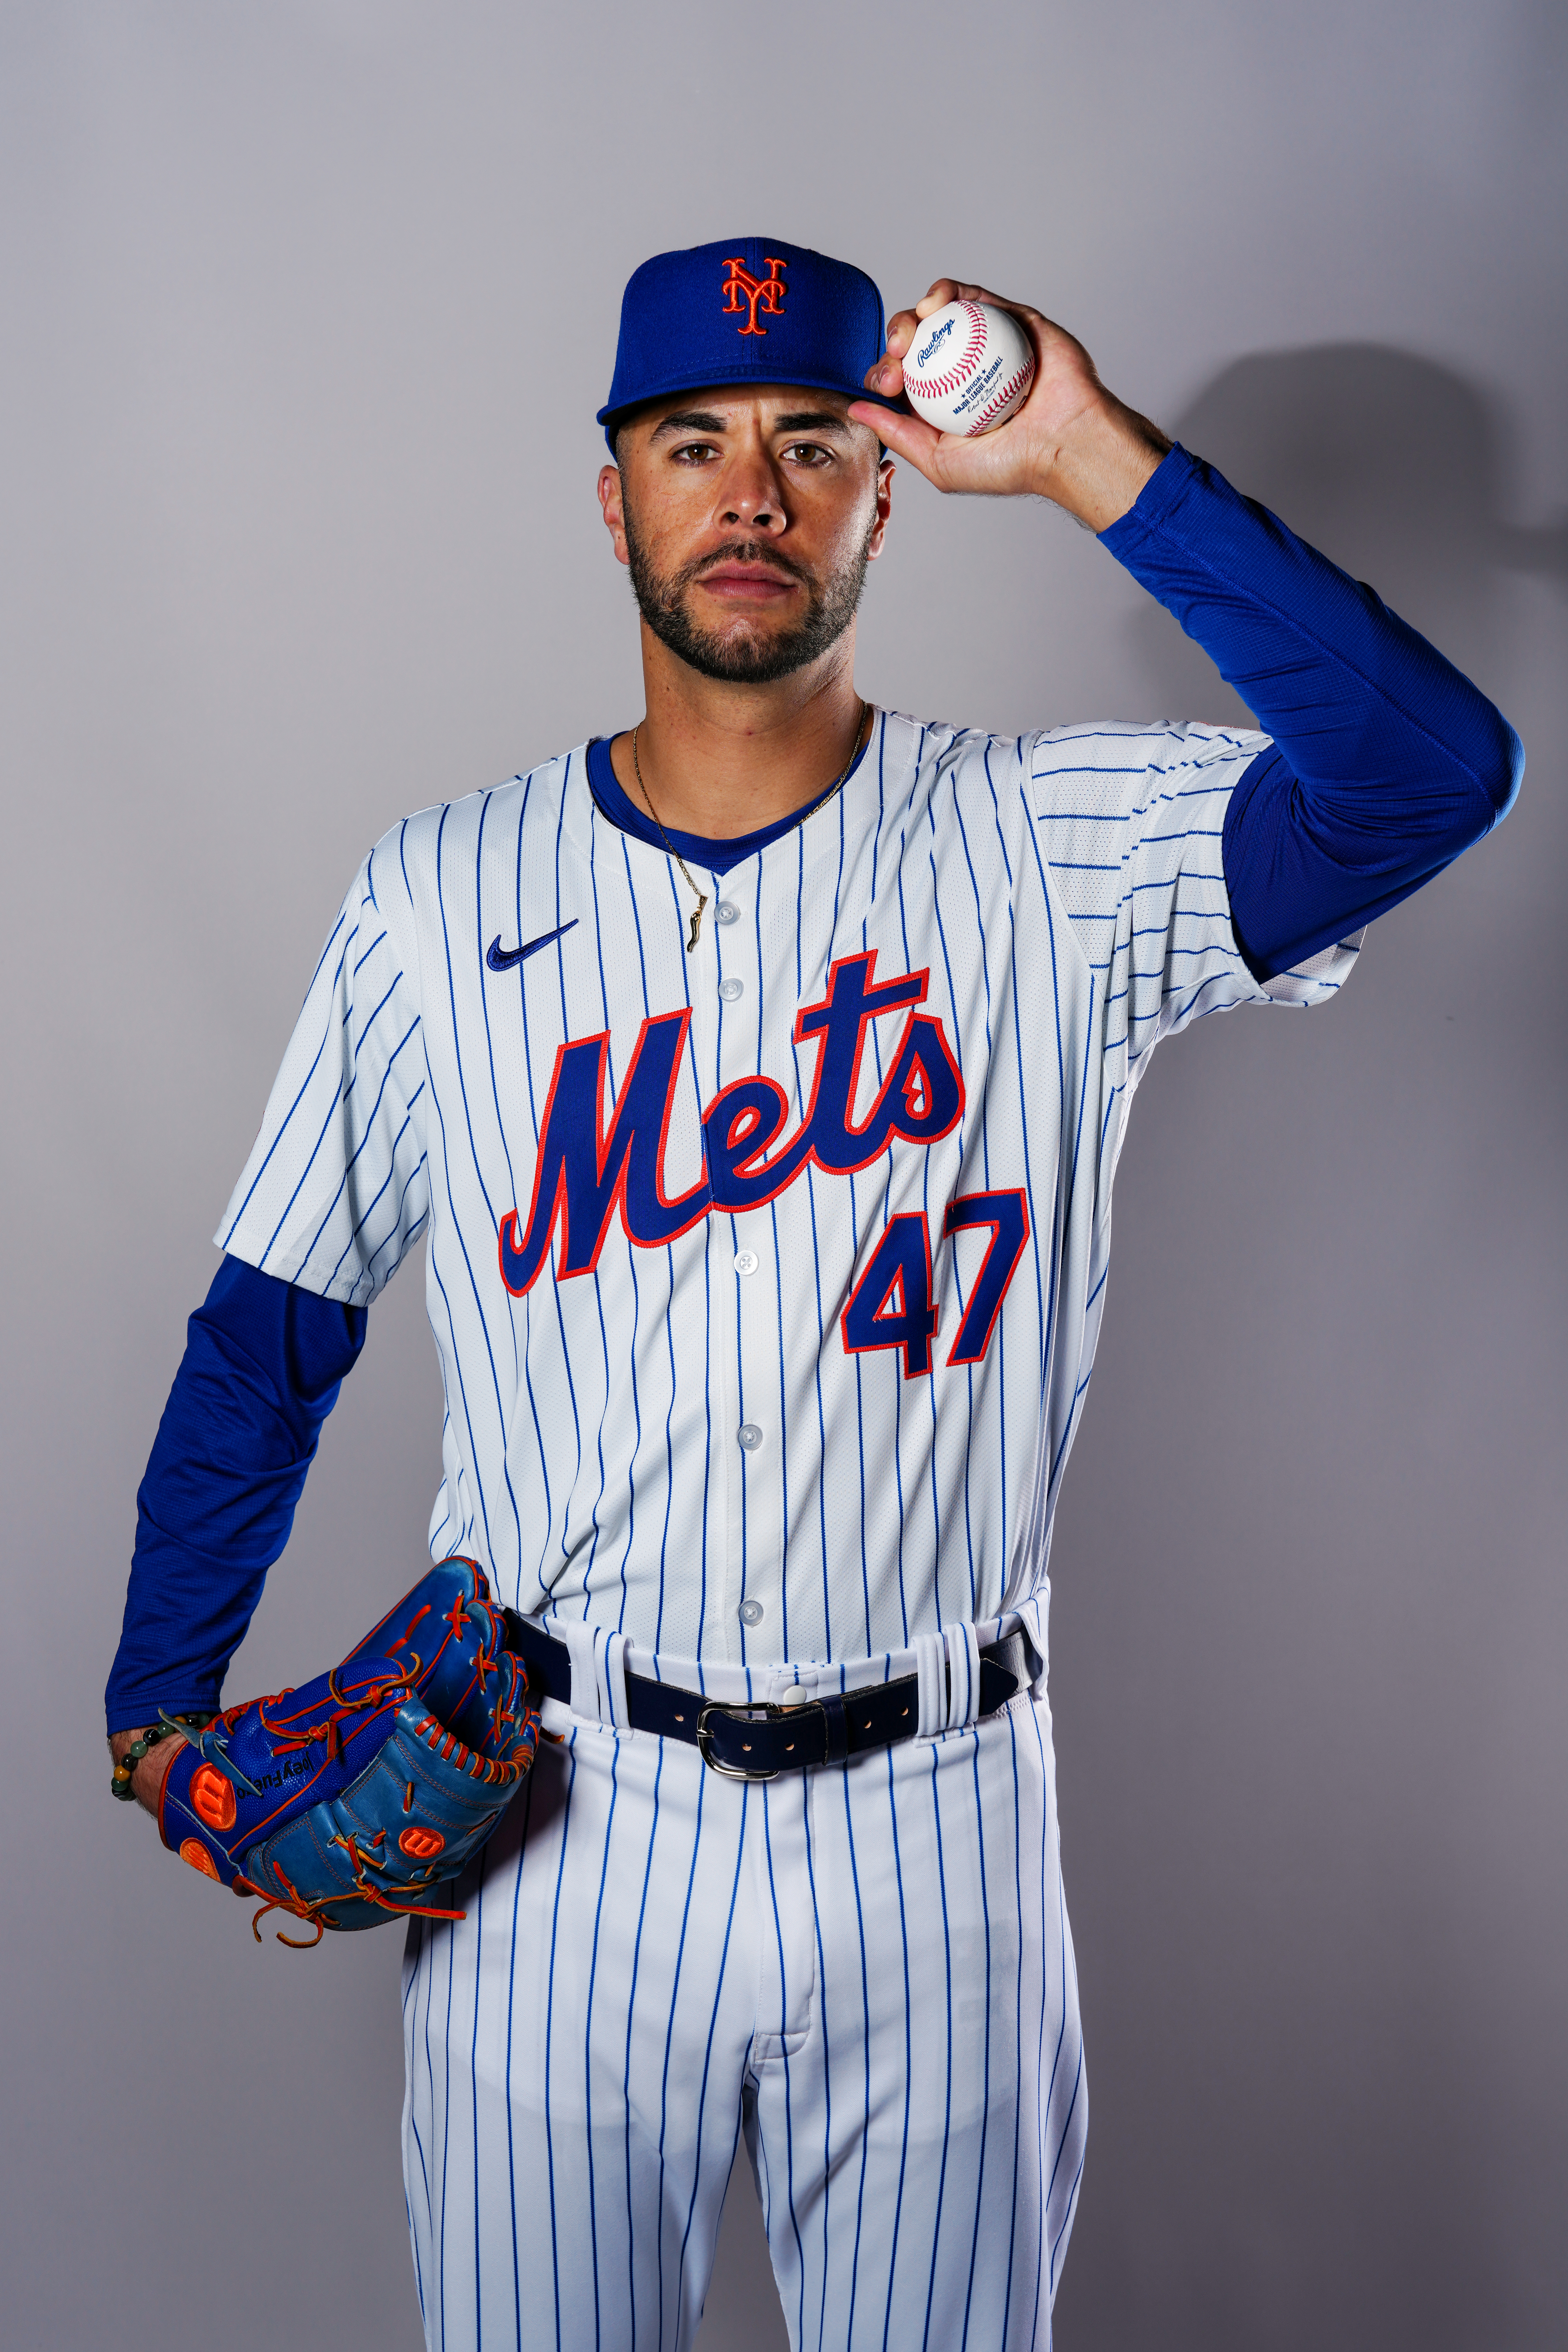 Joey Lucchesi in the Mets’ home uniform on media day, holding his hat with a baseball in his hand.